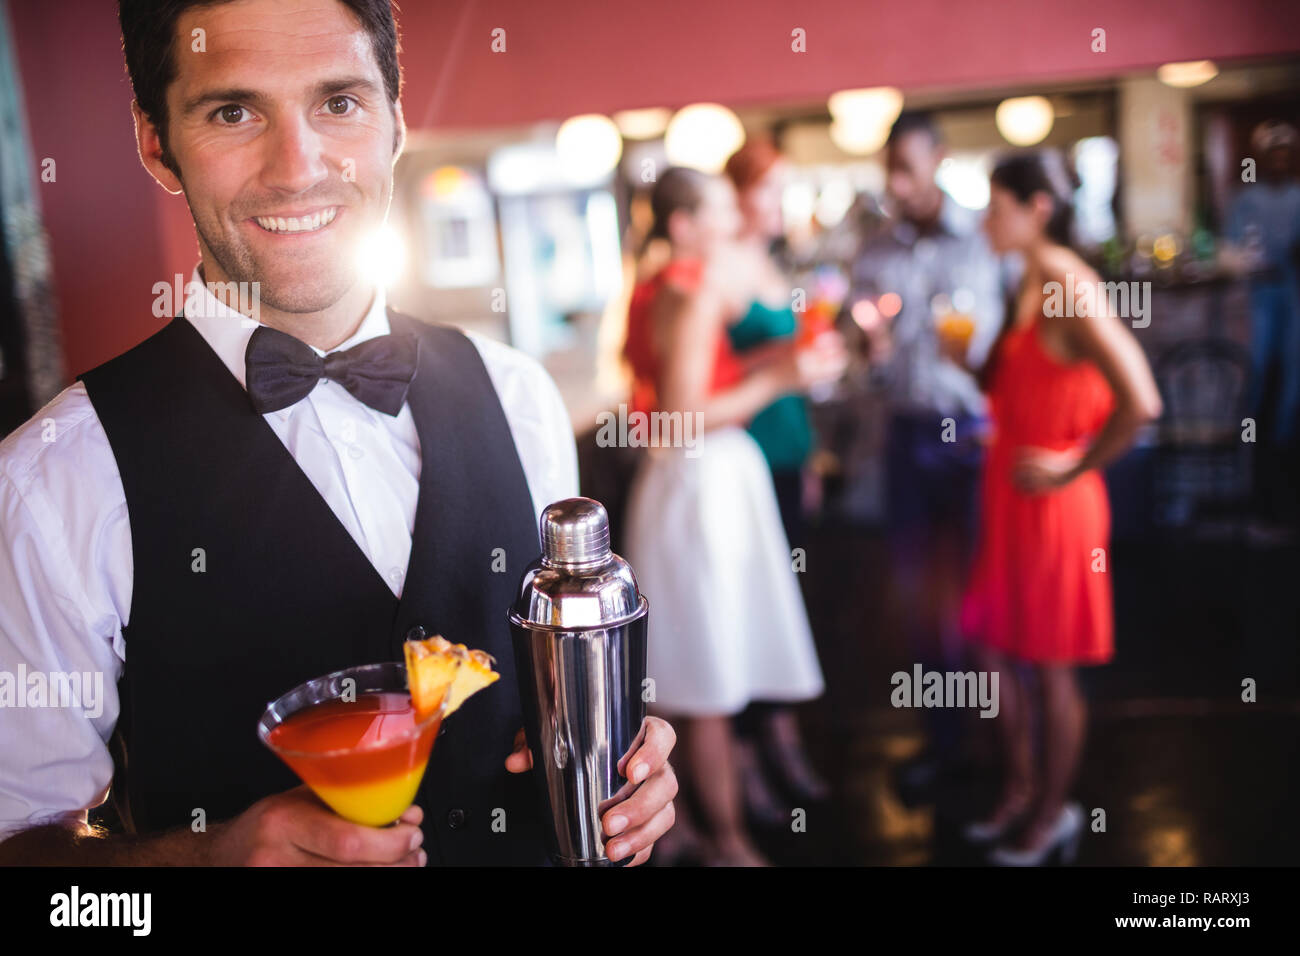 Bartender standing with cocktail glass and cocktail shaker in nightclub Stock Photo